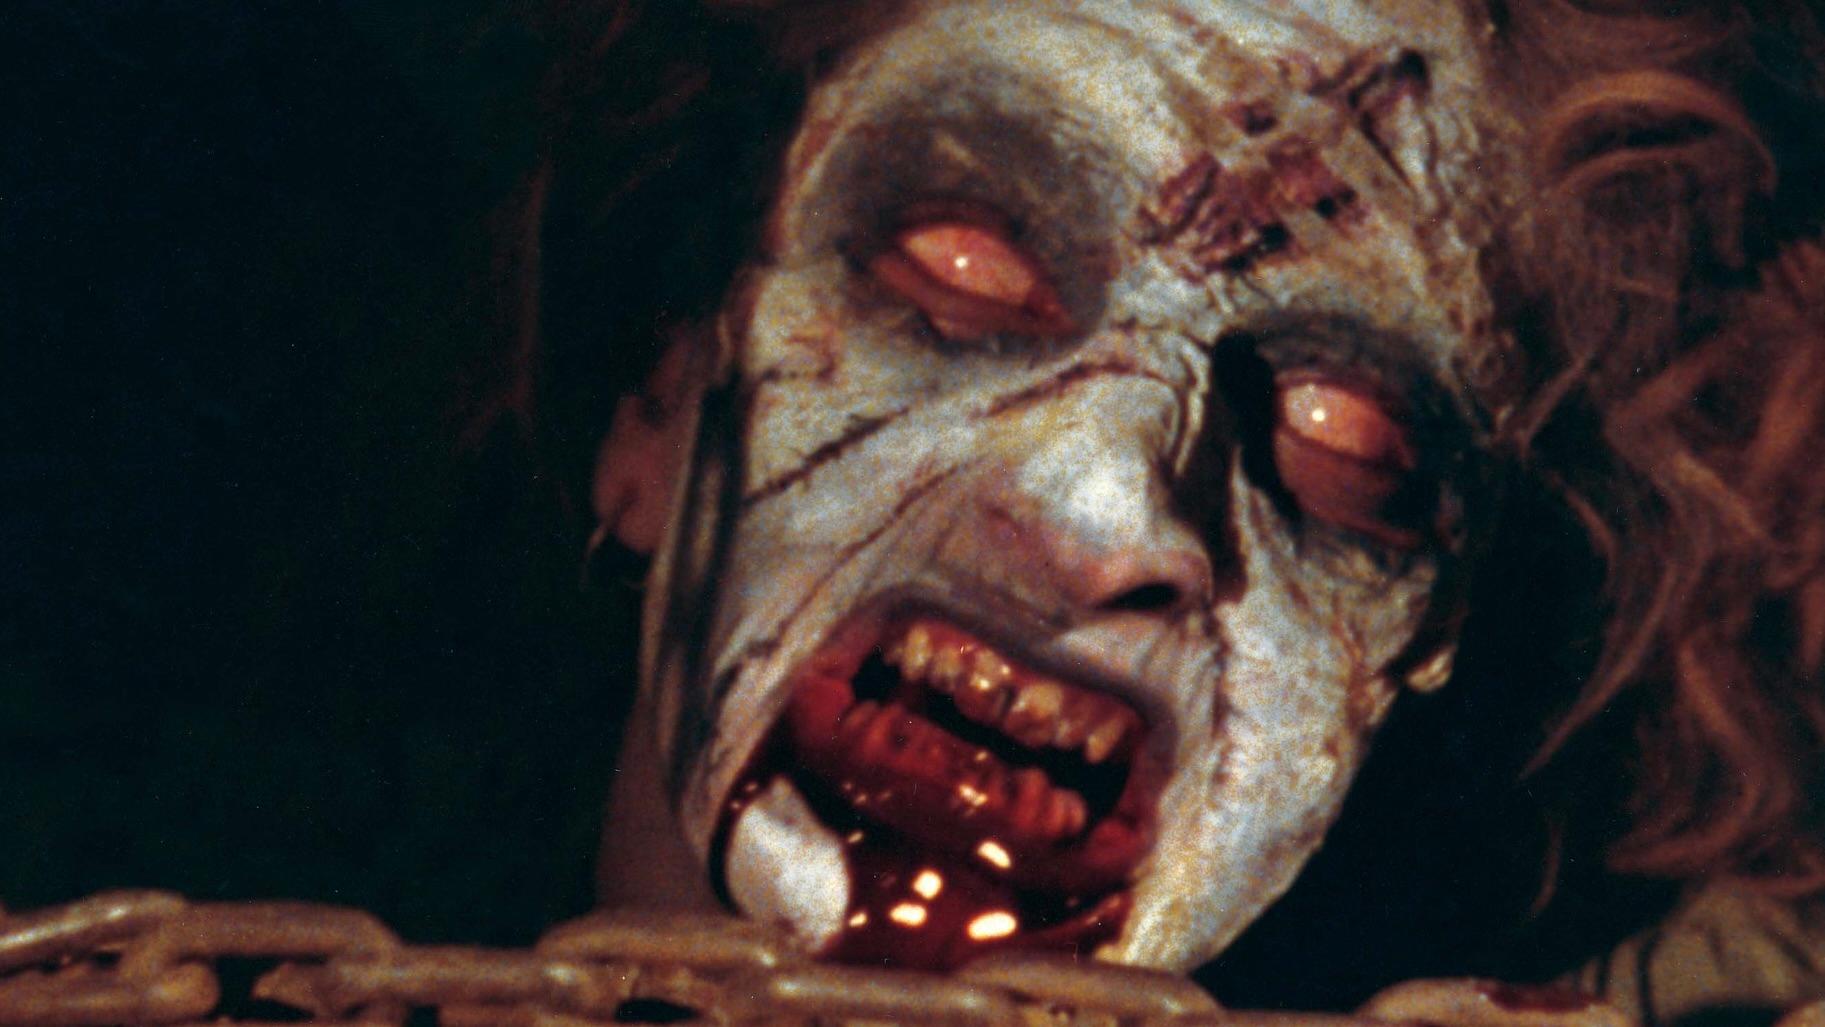 The scary demon lady in Evil Dead.